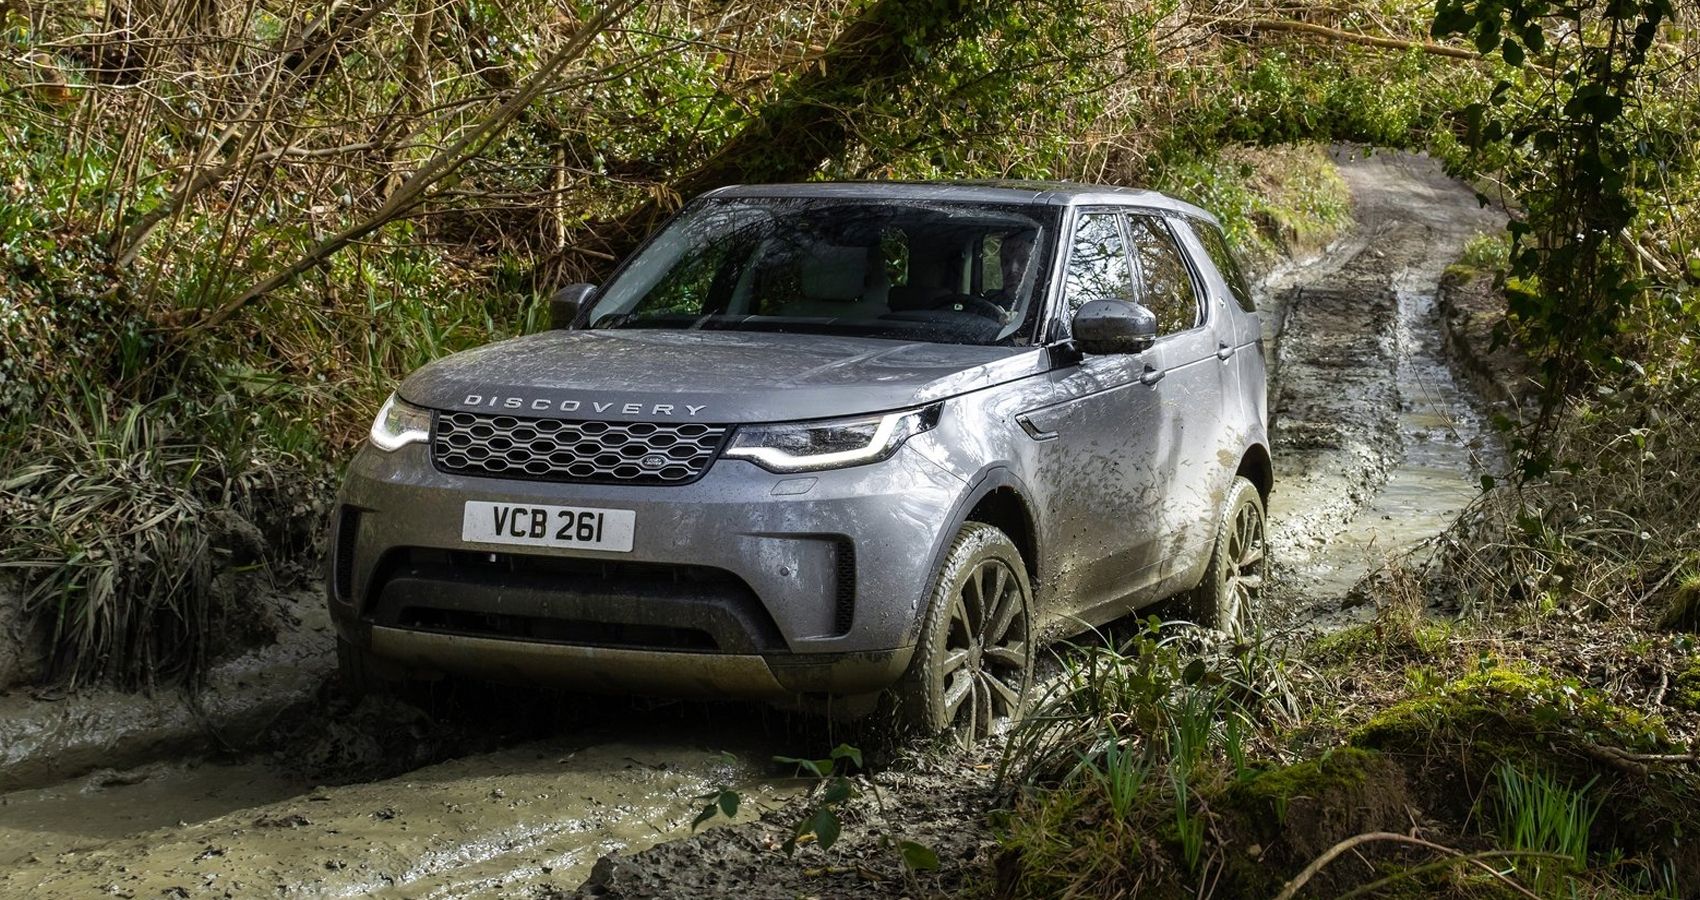 The front of a gray Discovery offroading